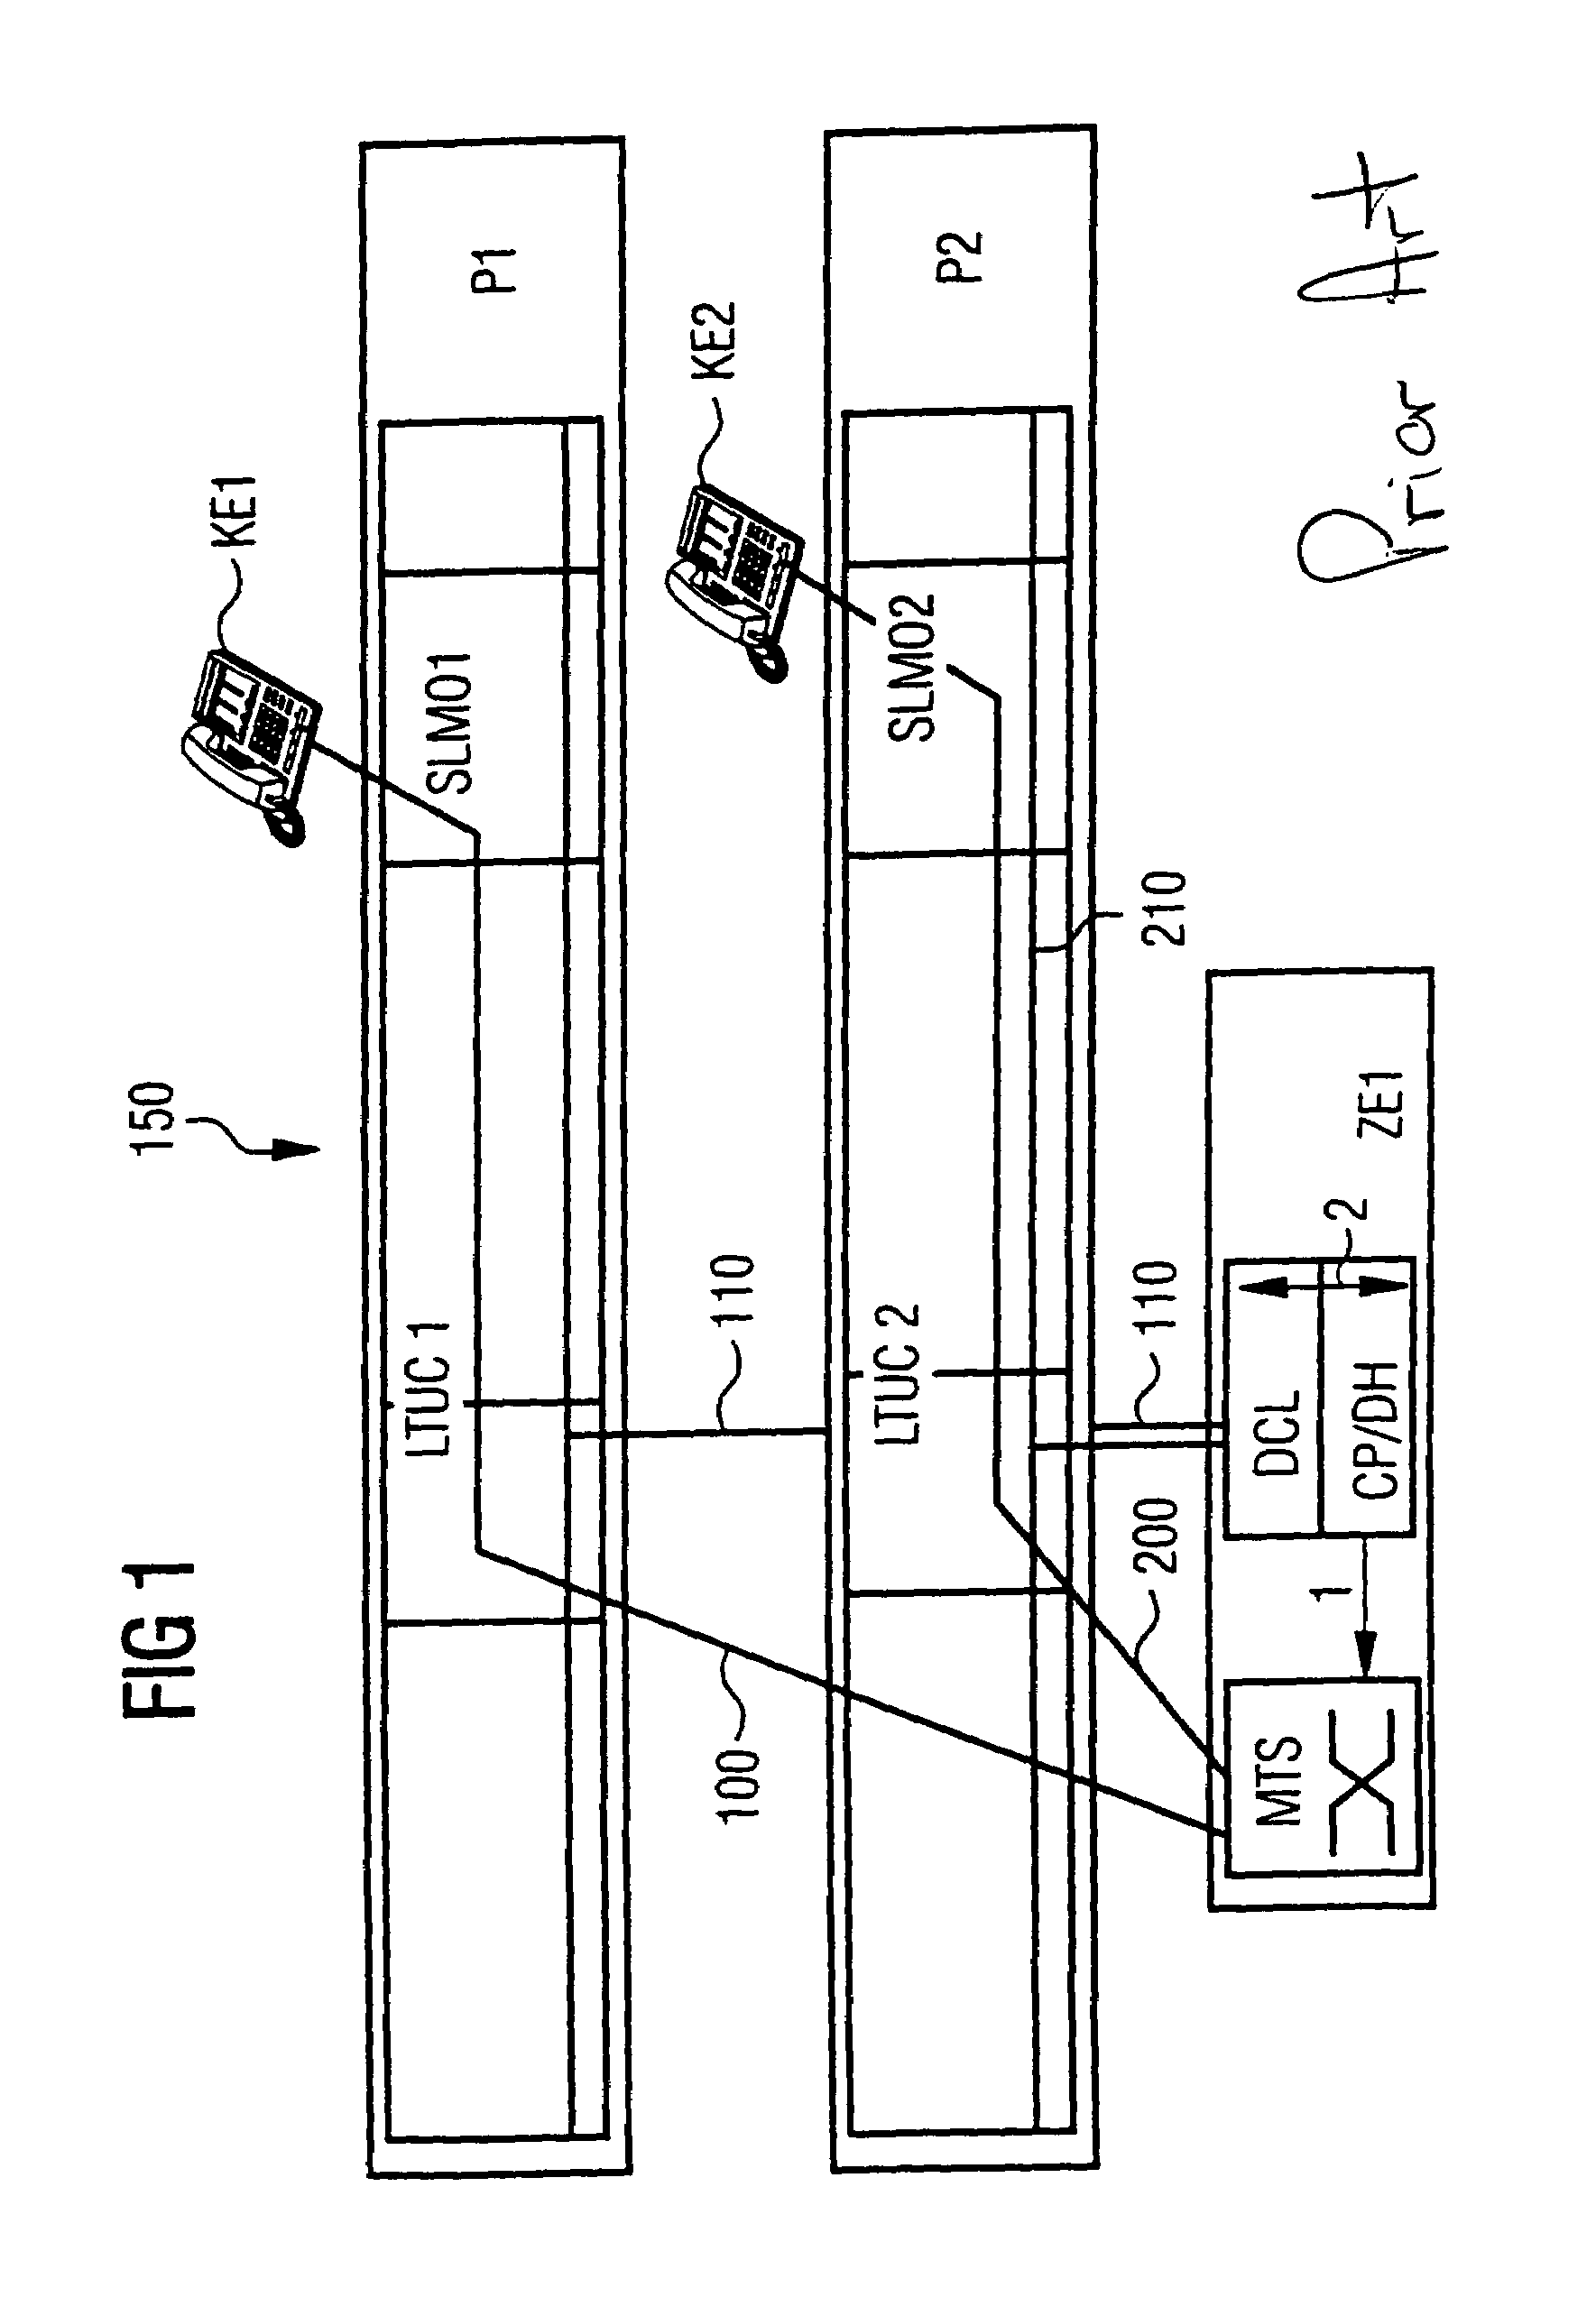 Method and arrangement for coupling messages in a central control device with decentralized communications devices